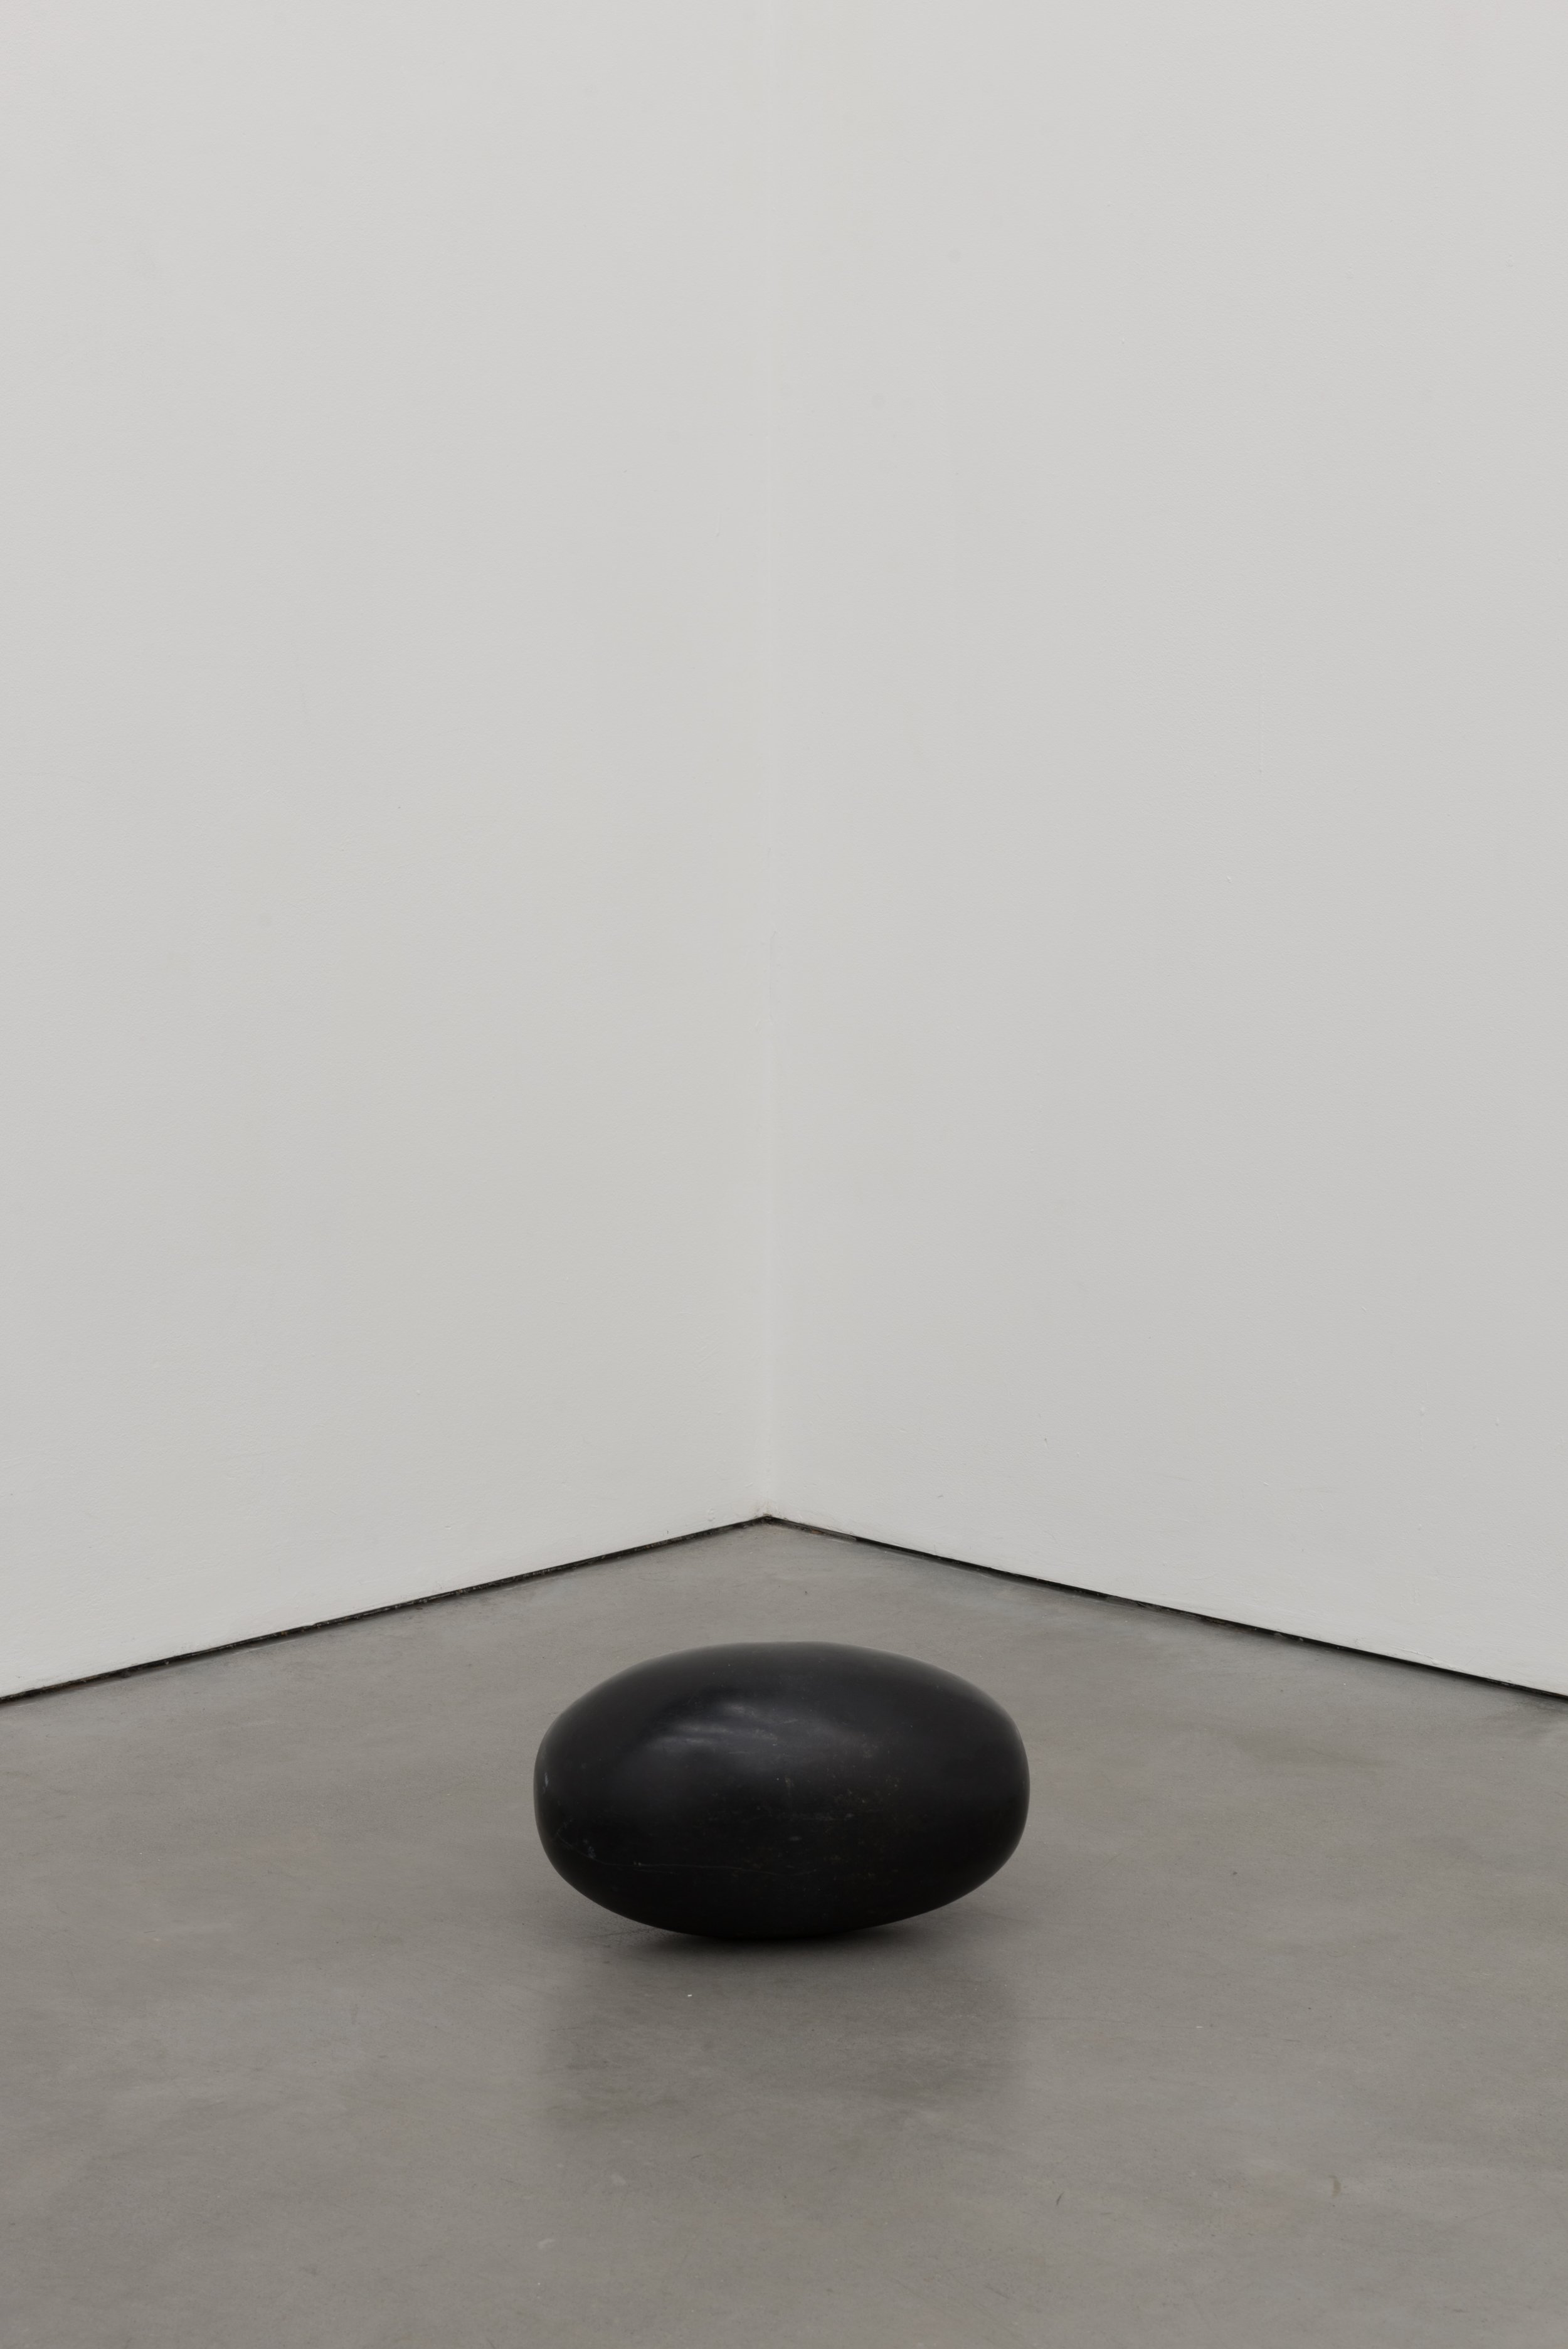   I am the river, attached to a rope &nbsp;  2022&nbsp;  Shiva Lingam stone&nbsp;  10 x 20 cm  Courtesy the artist and Michael Anastassiades 